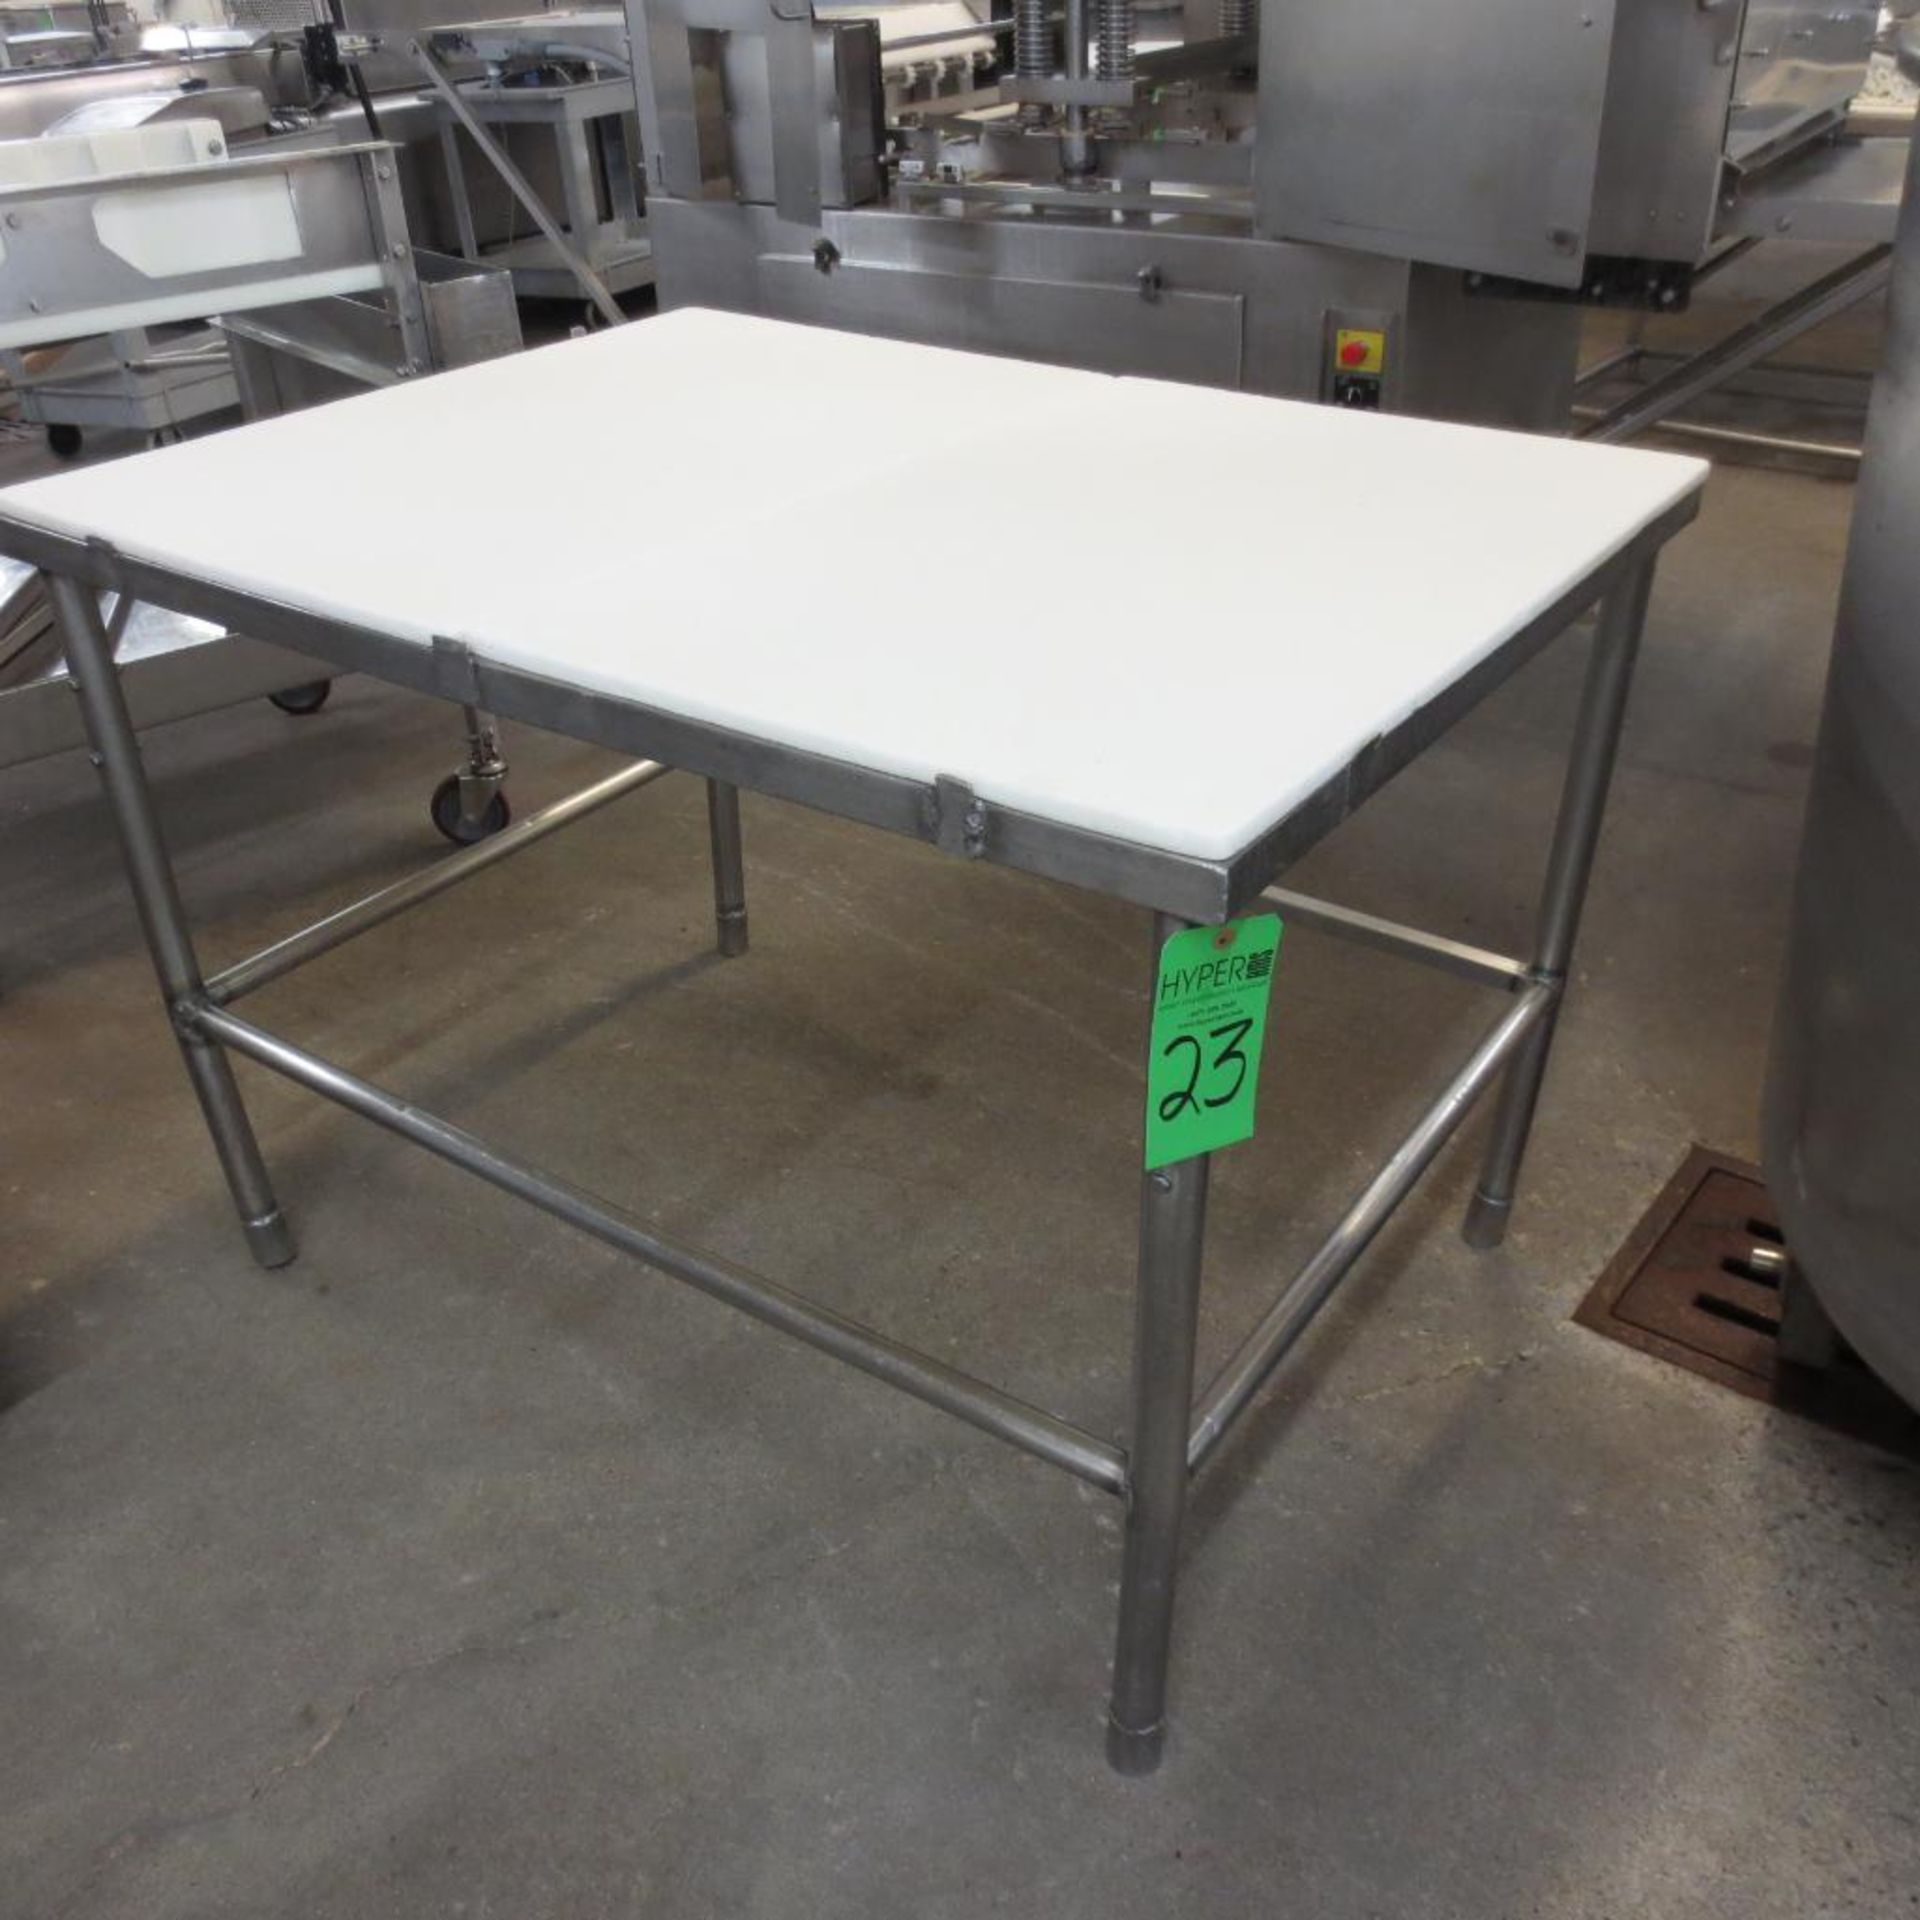 48" X 36" Stainless Table Frame with (2) 36" X 24" Cutting Board Table Tops